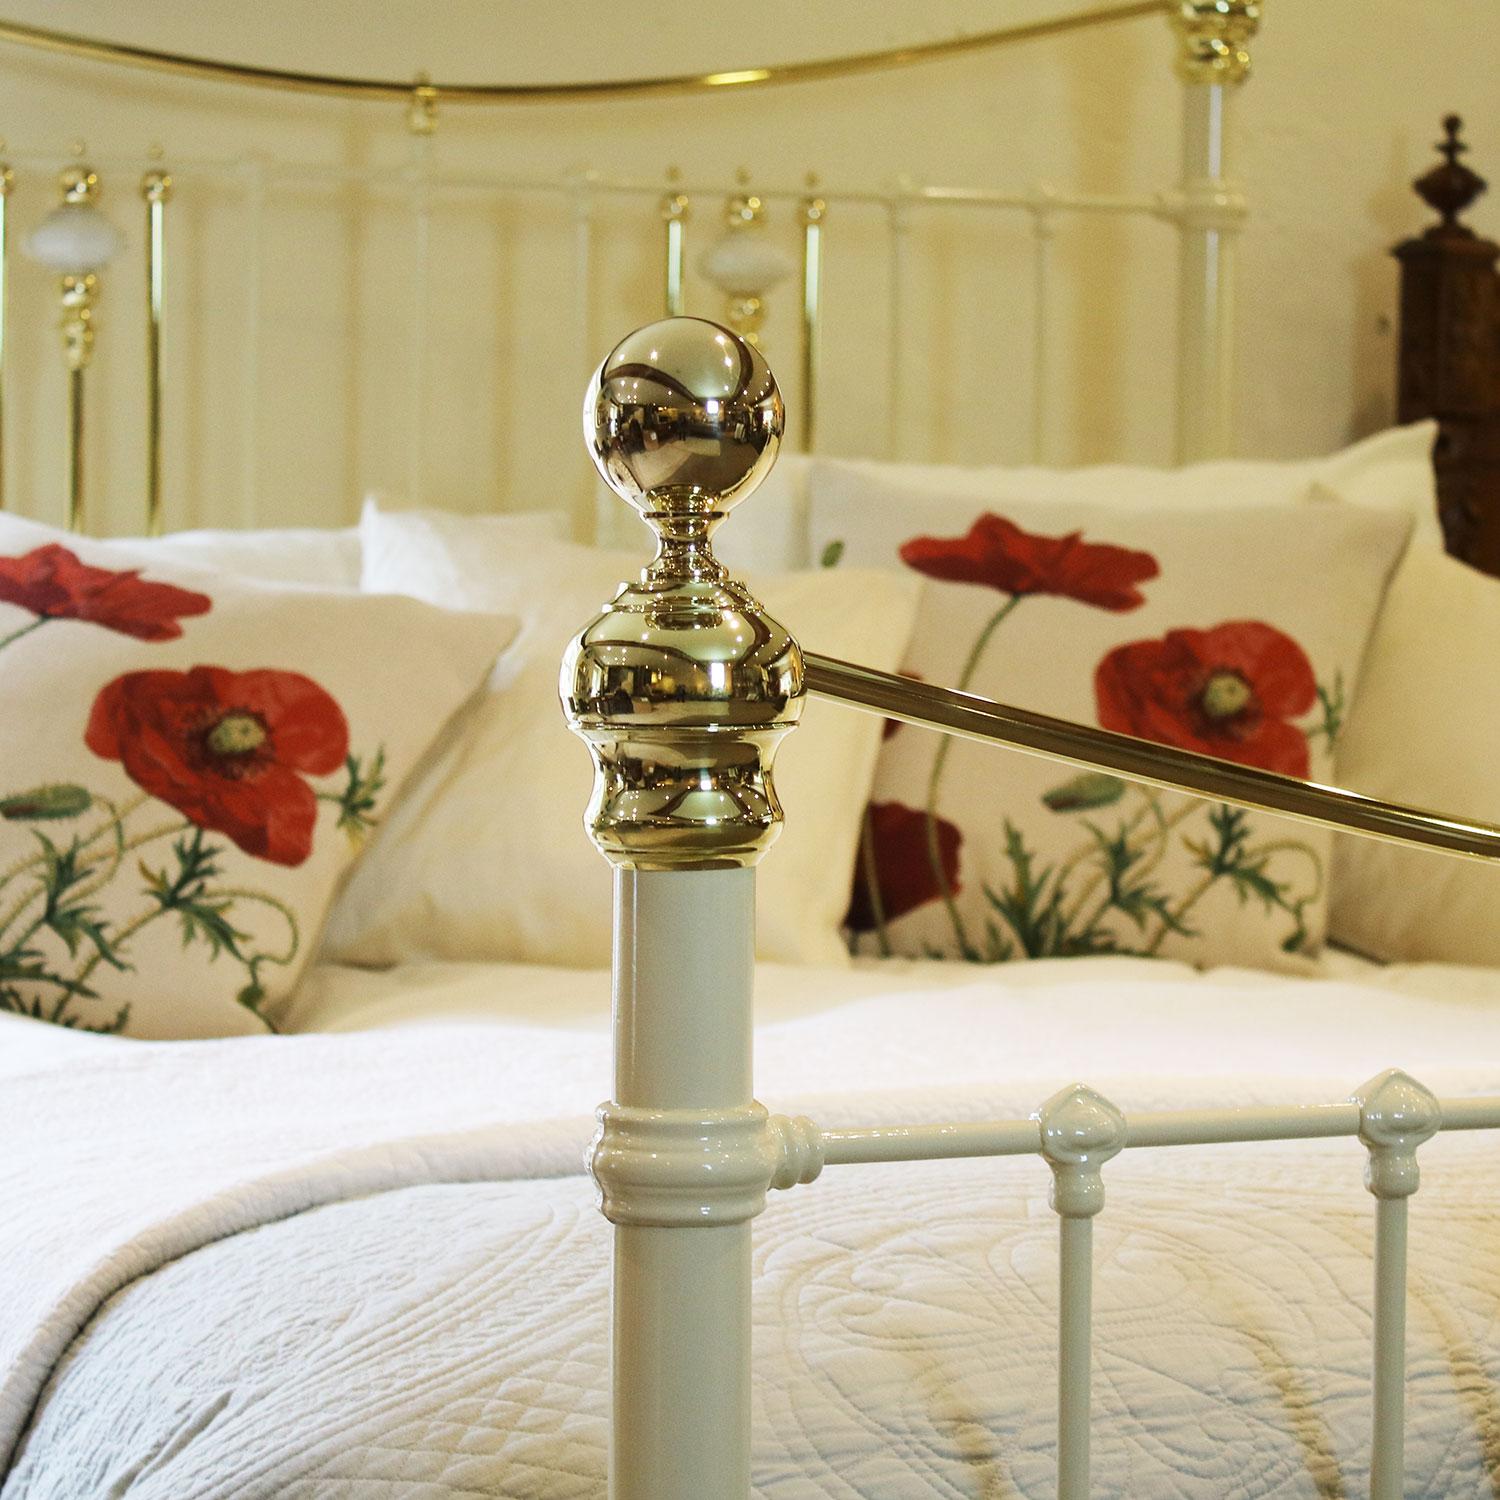 Cast iron and brass bedstead, finished in cream with ivory octagonal china decorations and curved brass top rails.

The price includes a standard firm bed base to support the mattress. 

The mattress, bedding and bed linen are extra.